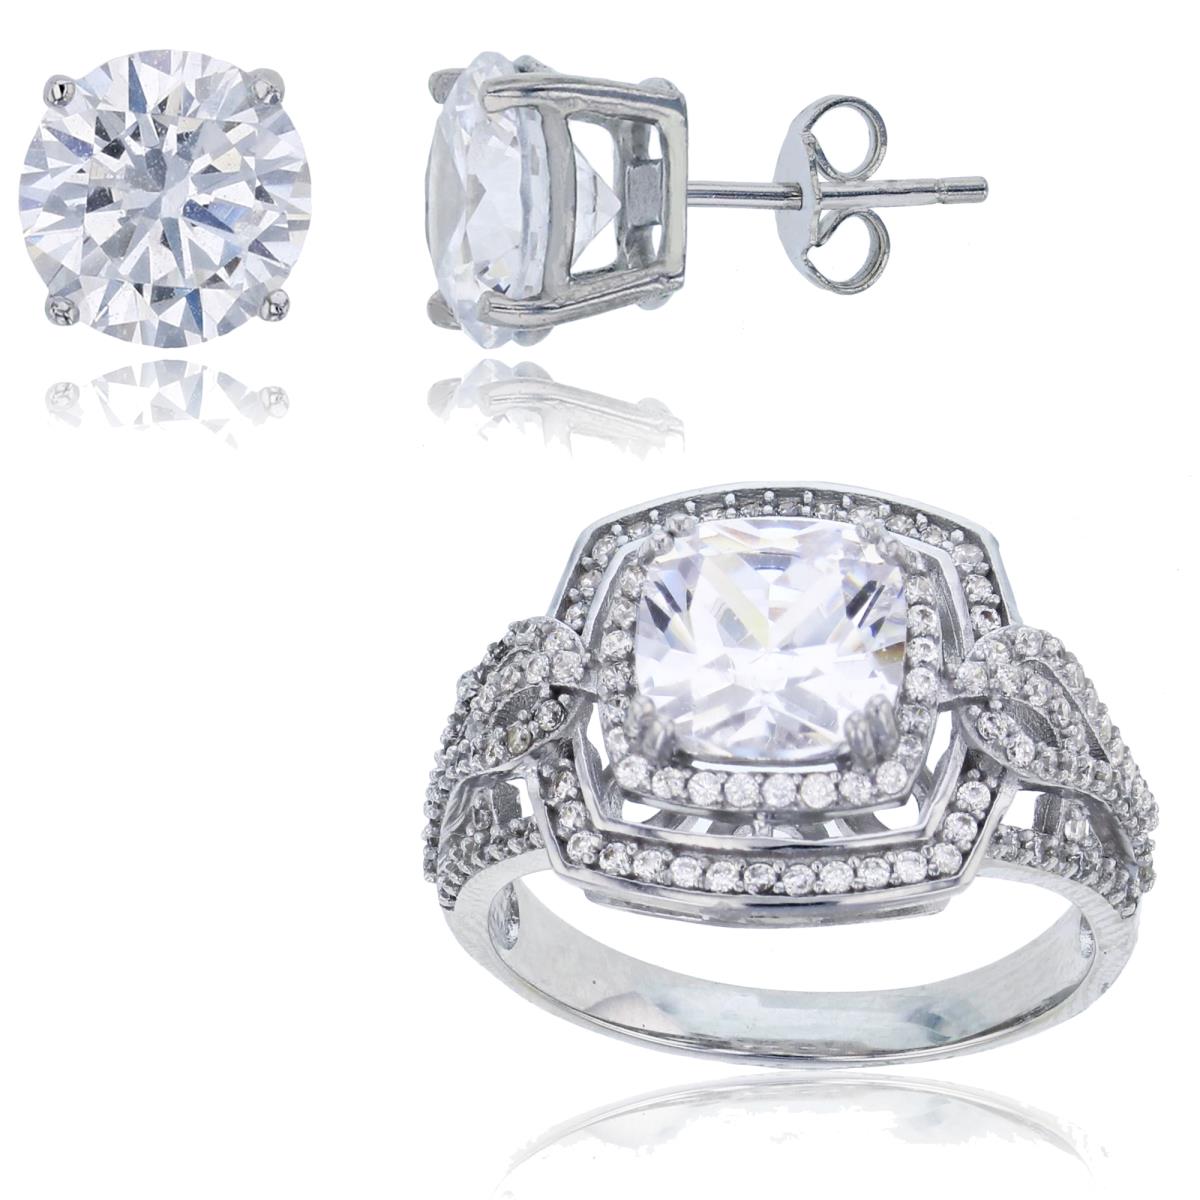 Sterling Silver Rhodium 8mm Cushion Cut CZ Dbl Halo Ring & 8mm Rd Solitaire Stud Earring Set